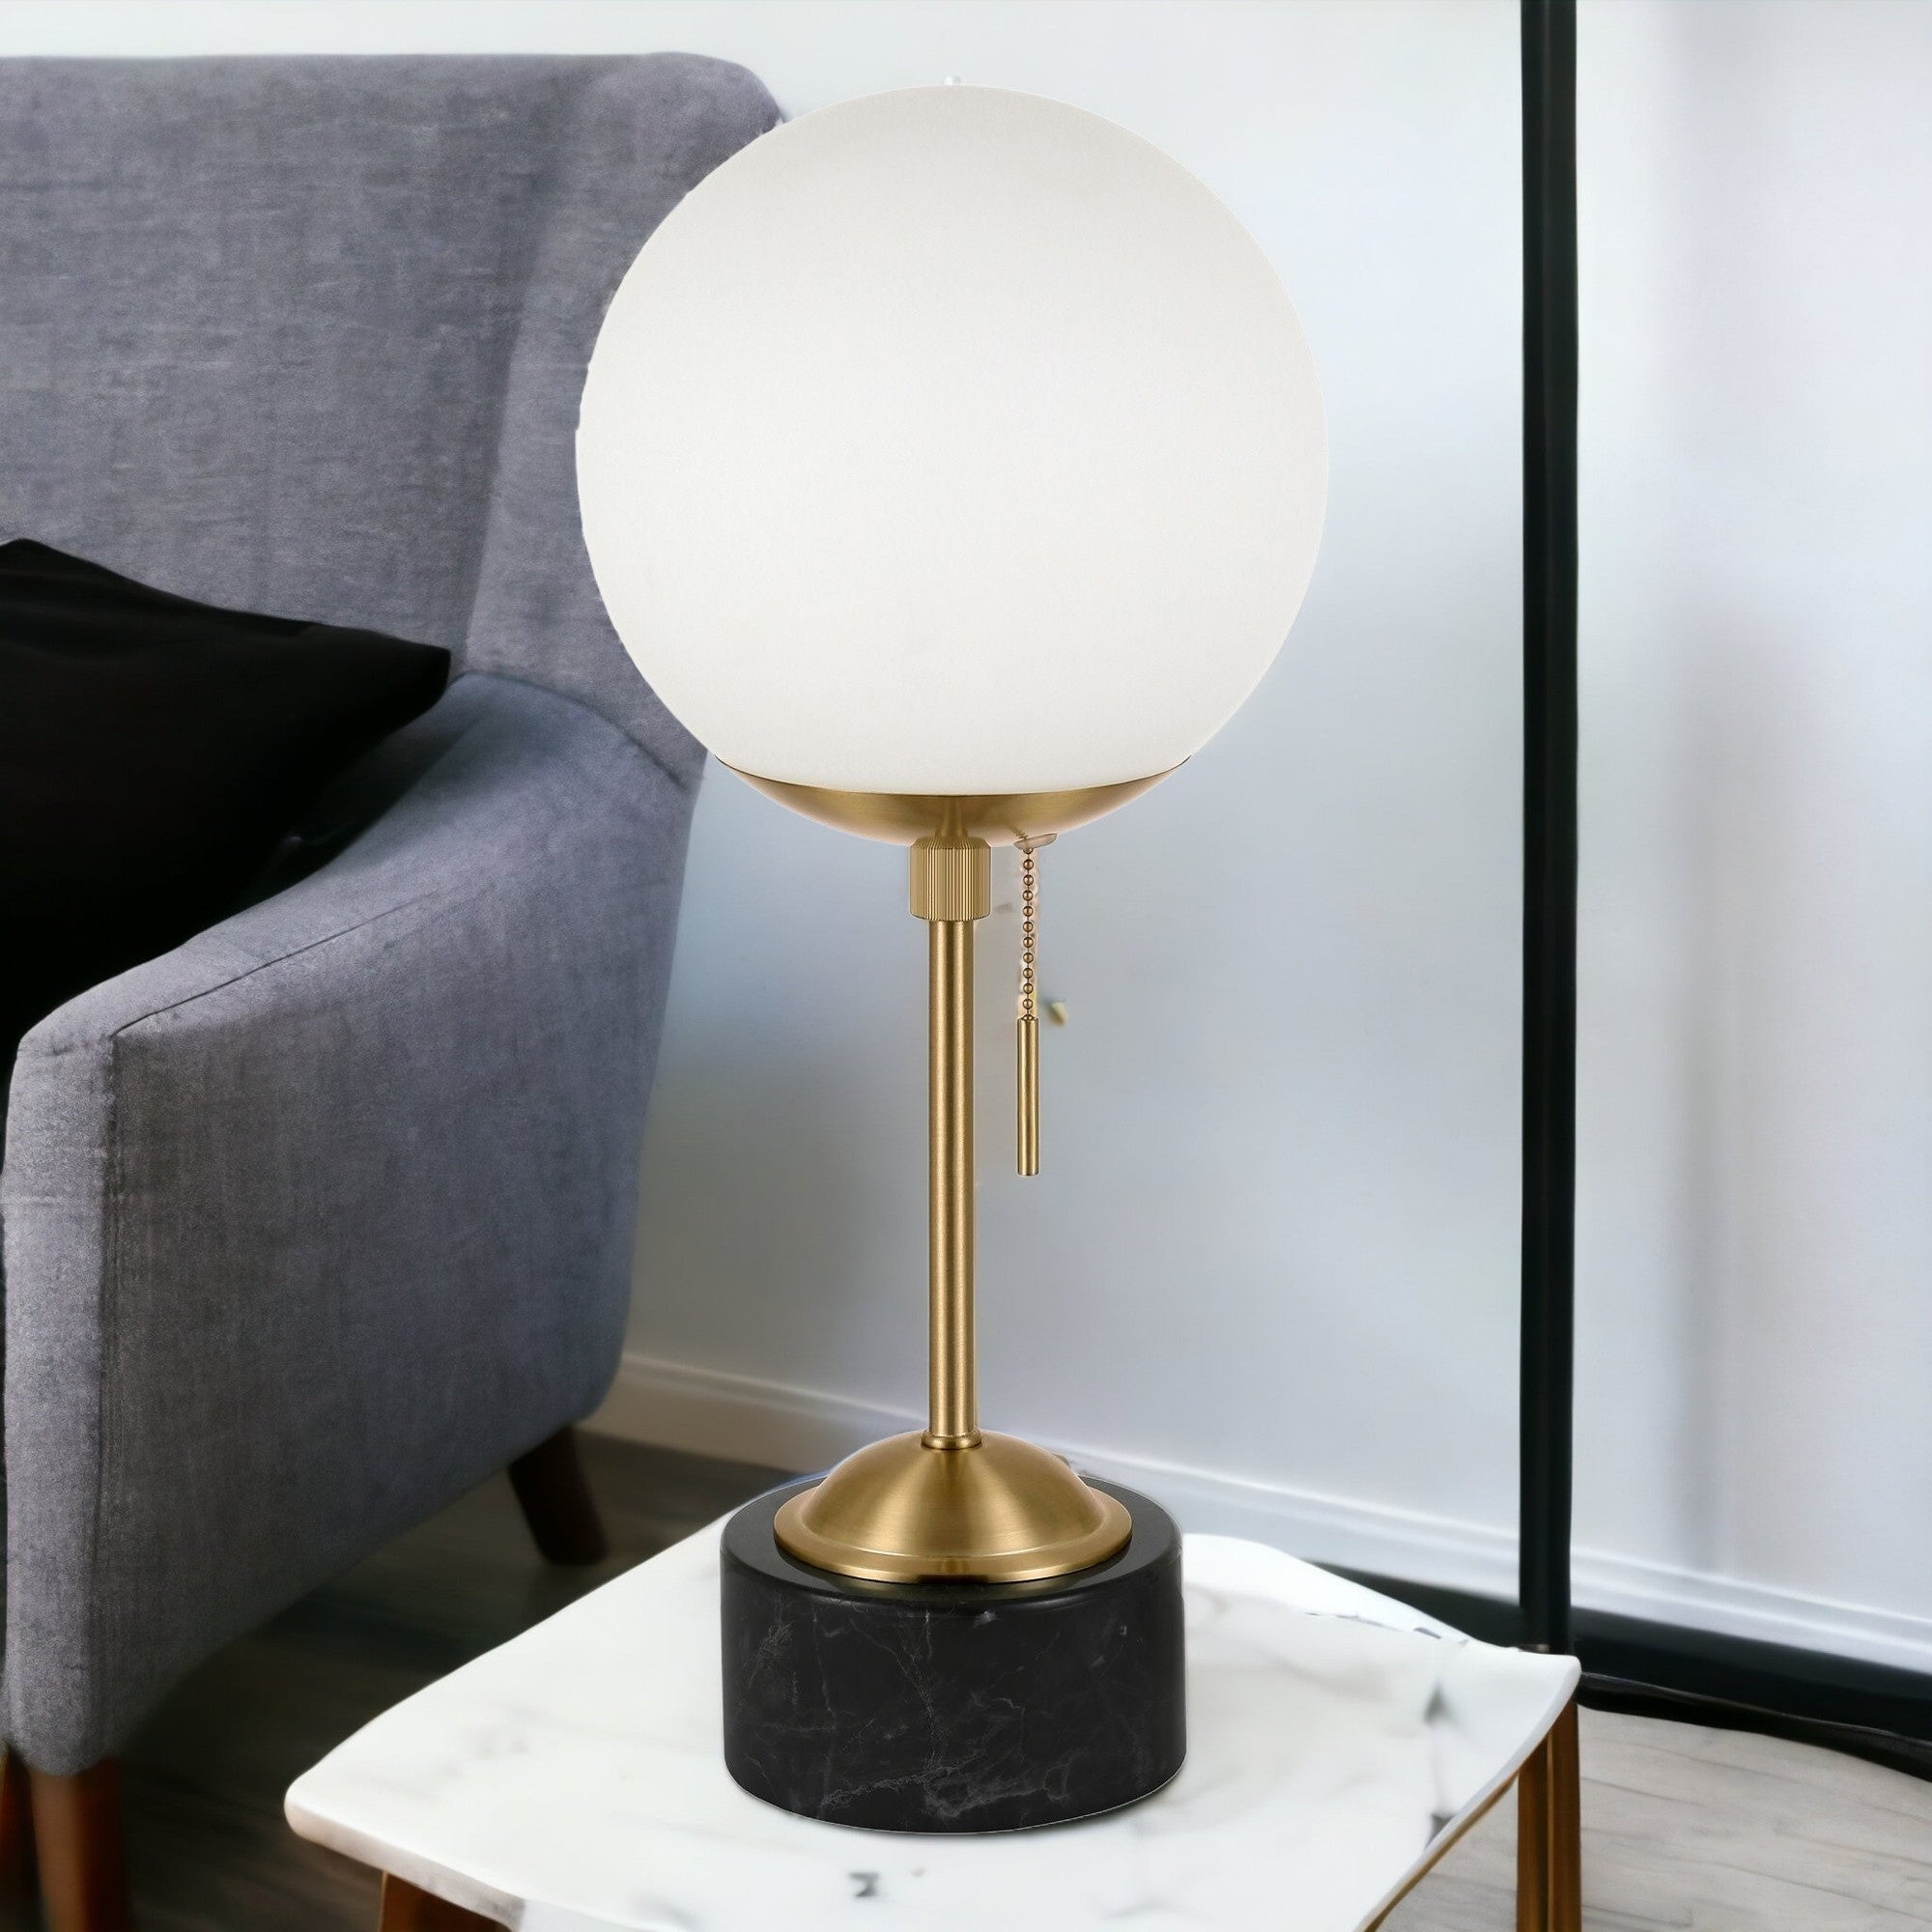 18" Black and Gold Marble Globe Table Lamp With White Globe Shade